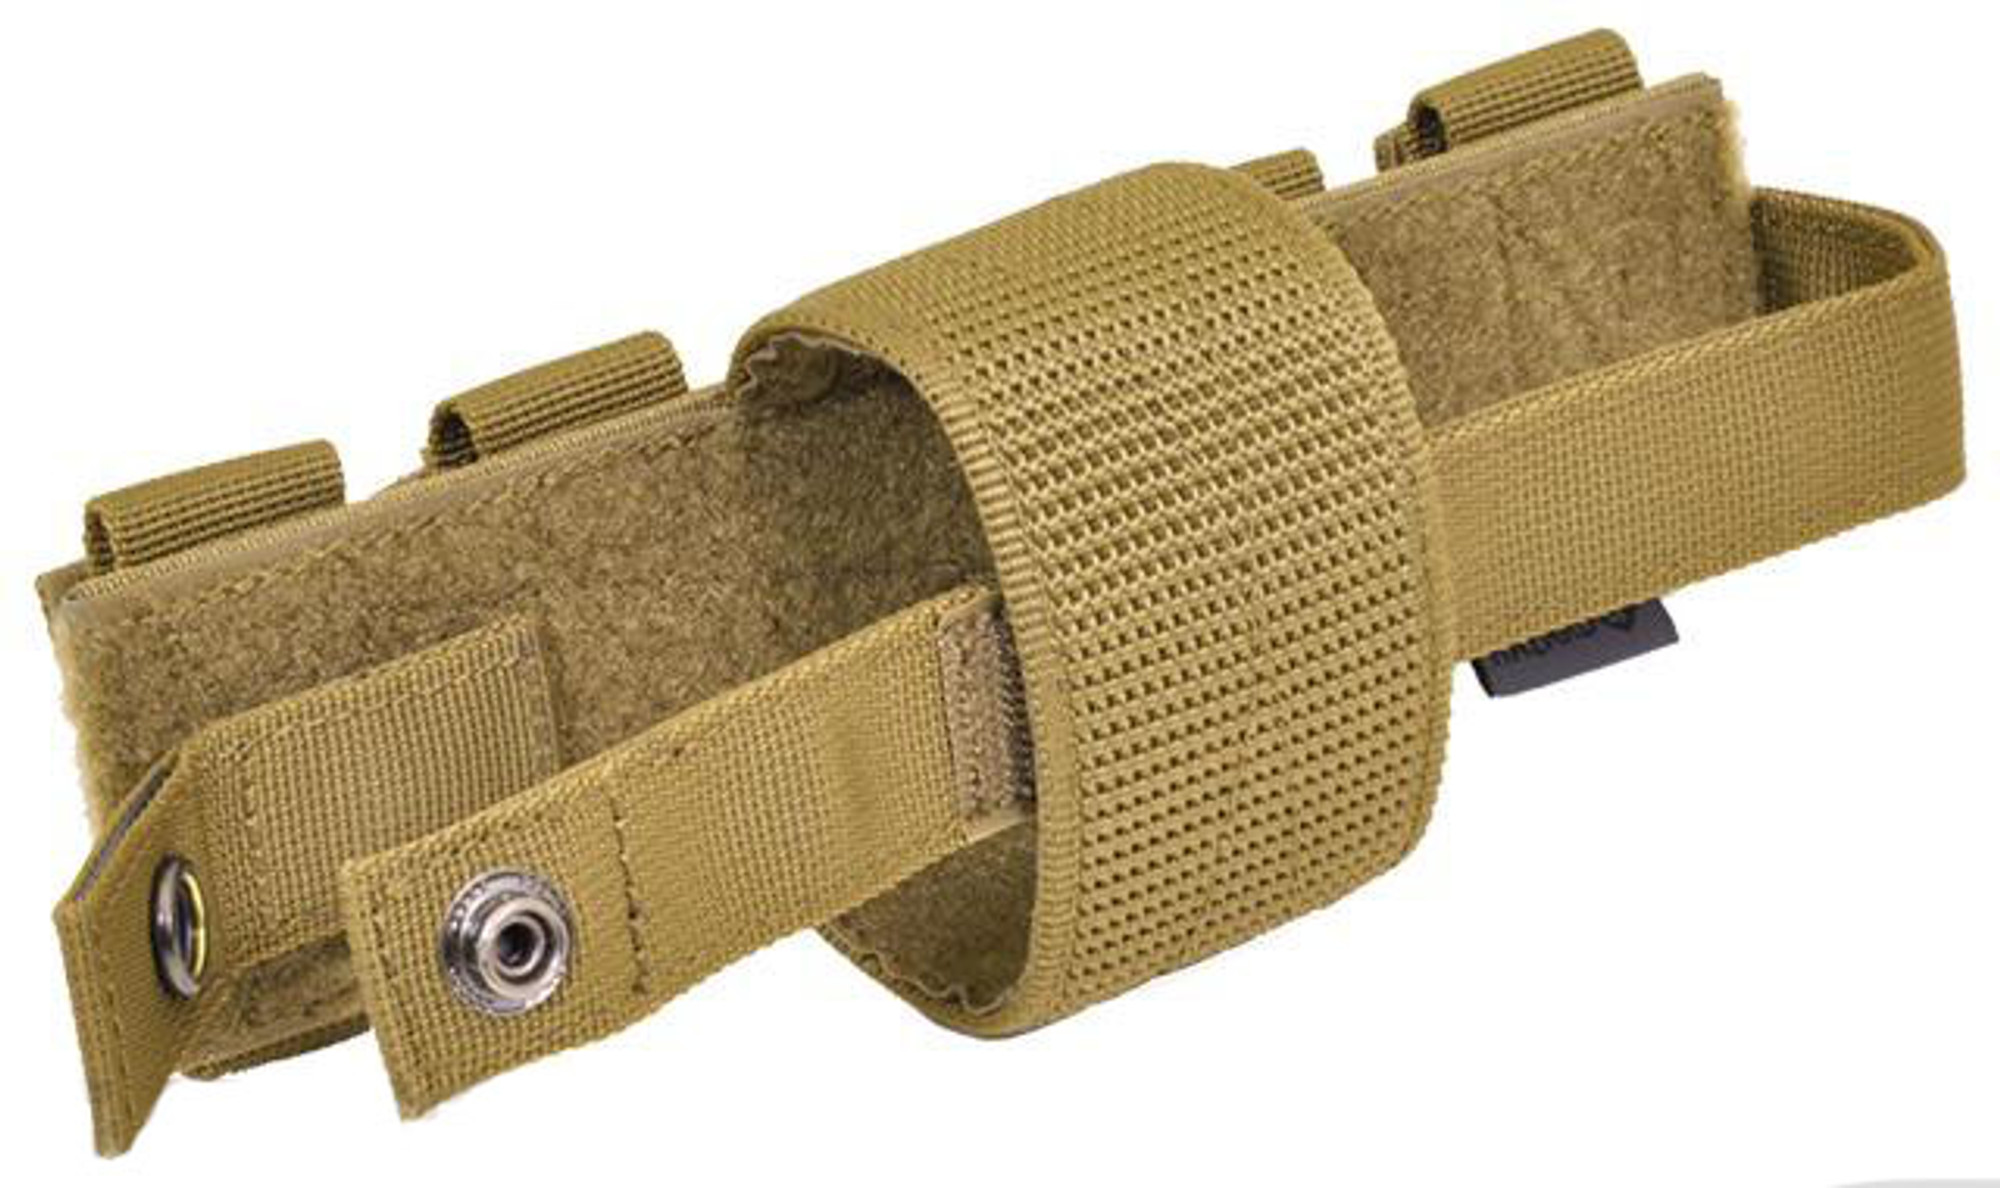 Hazard 4 Load-Up MOLLE Gear / Magazine Holster - Coyote